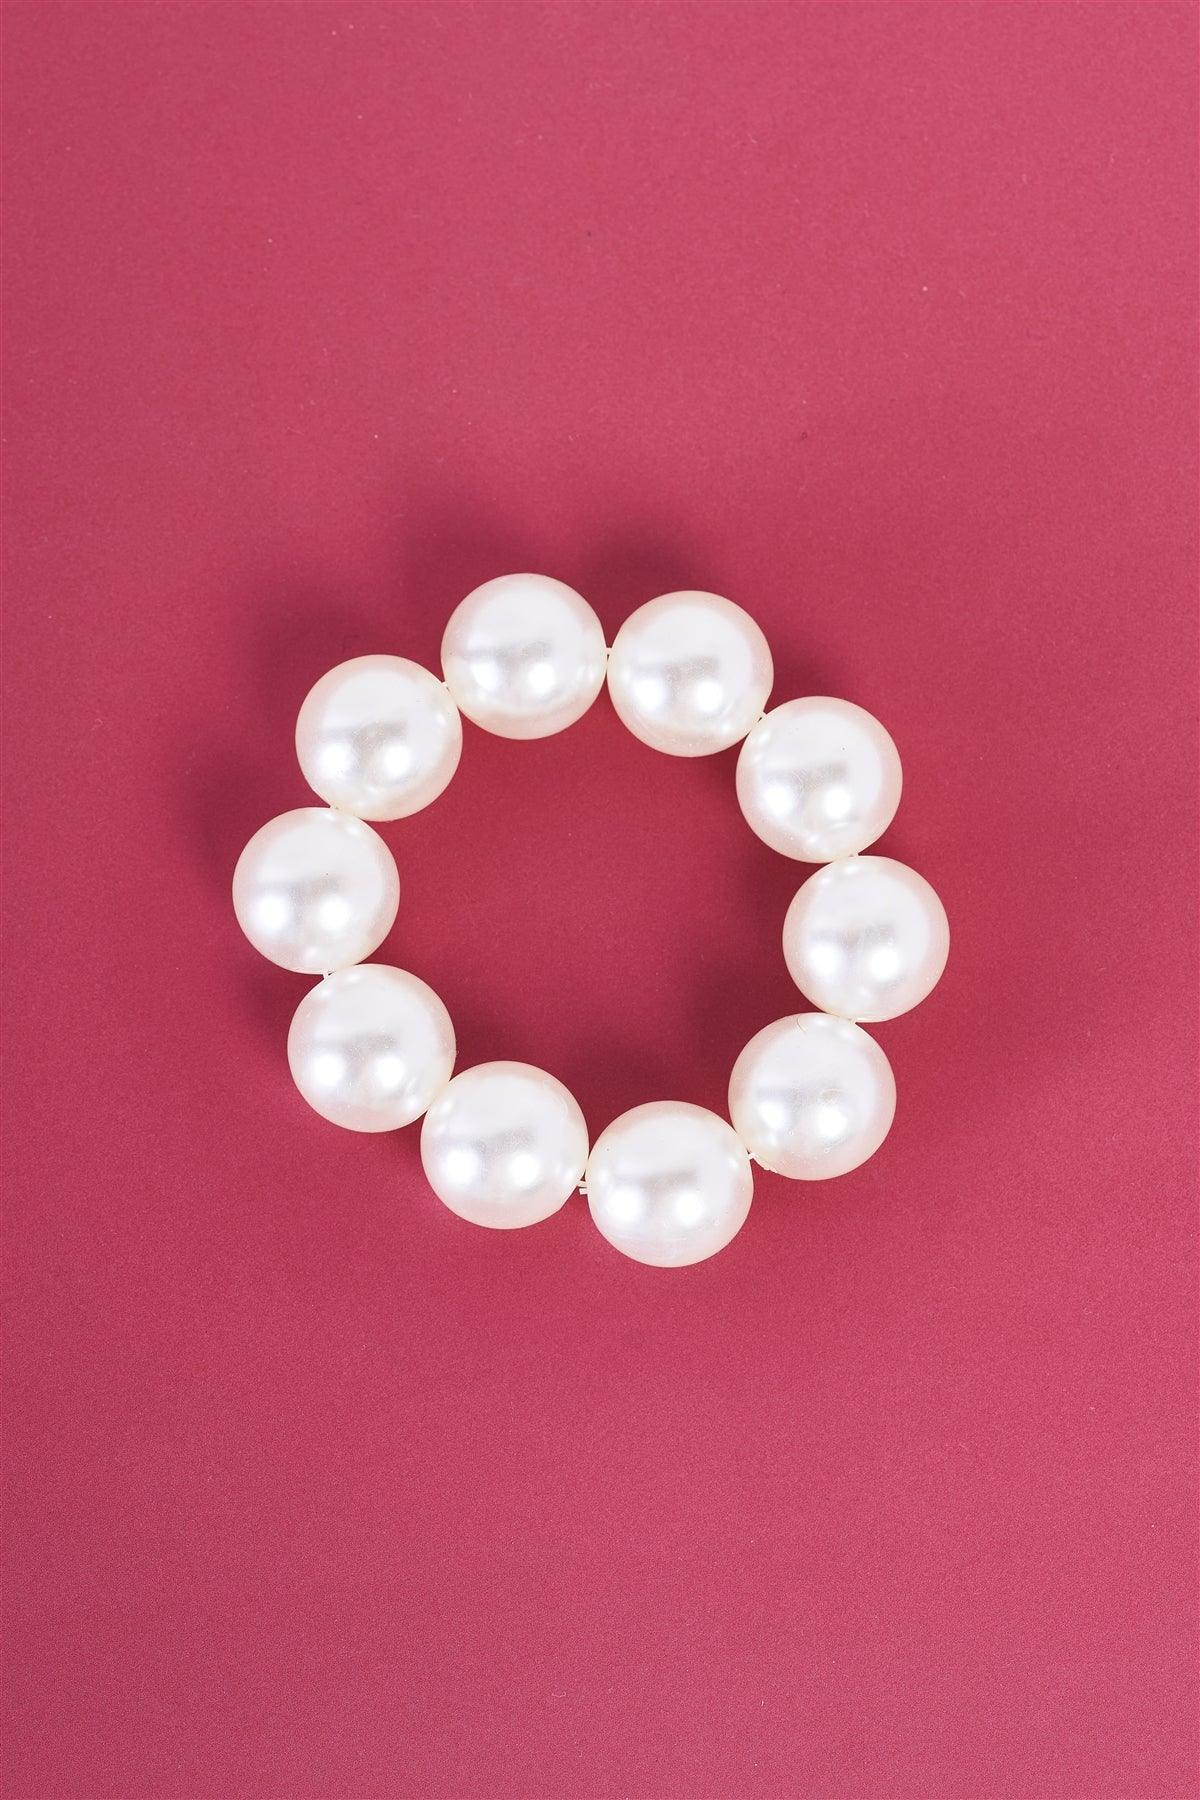 Pearls Are Always Relevant Large Pearl Wrist Bracelet /3 Pieces